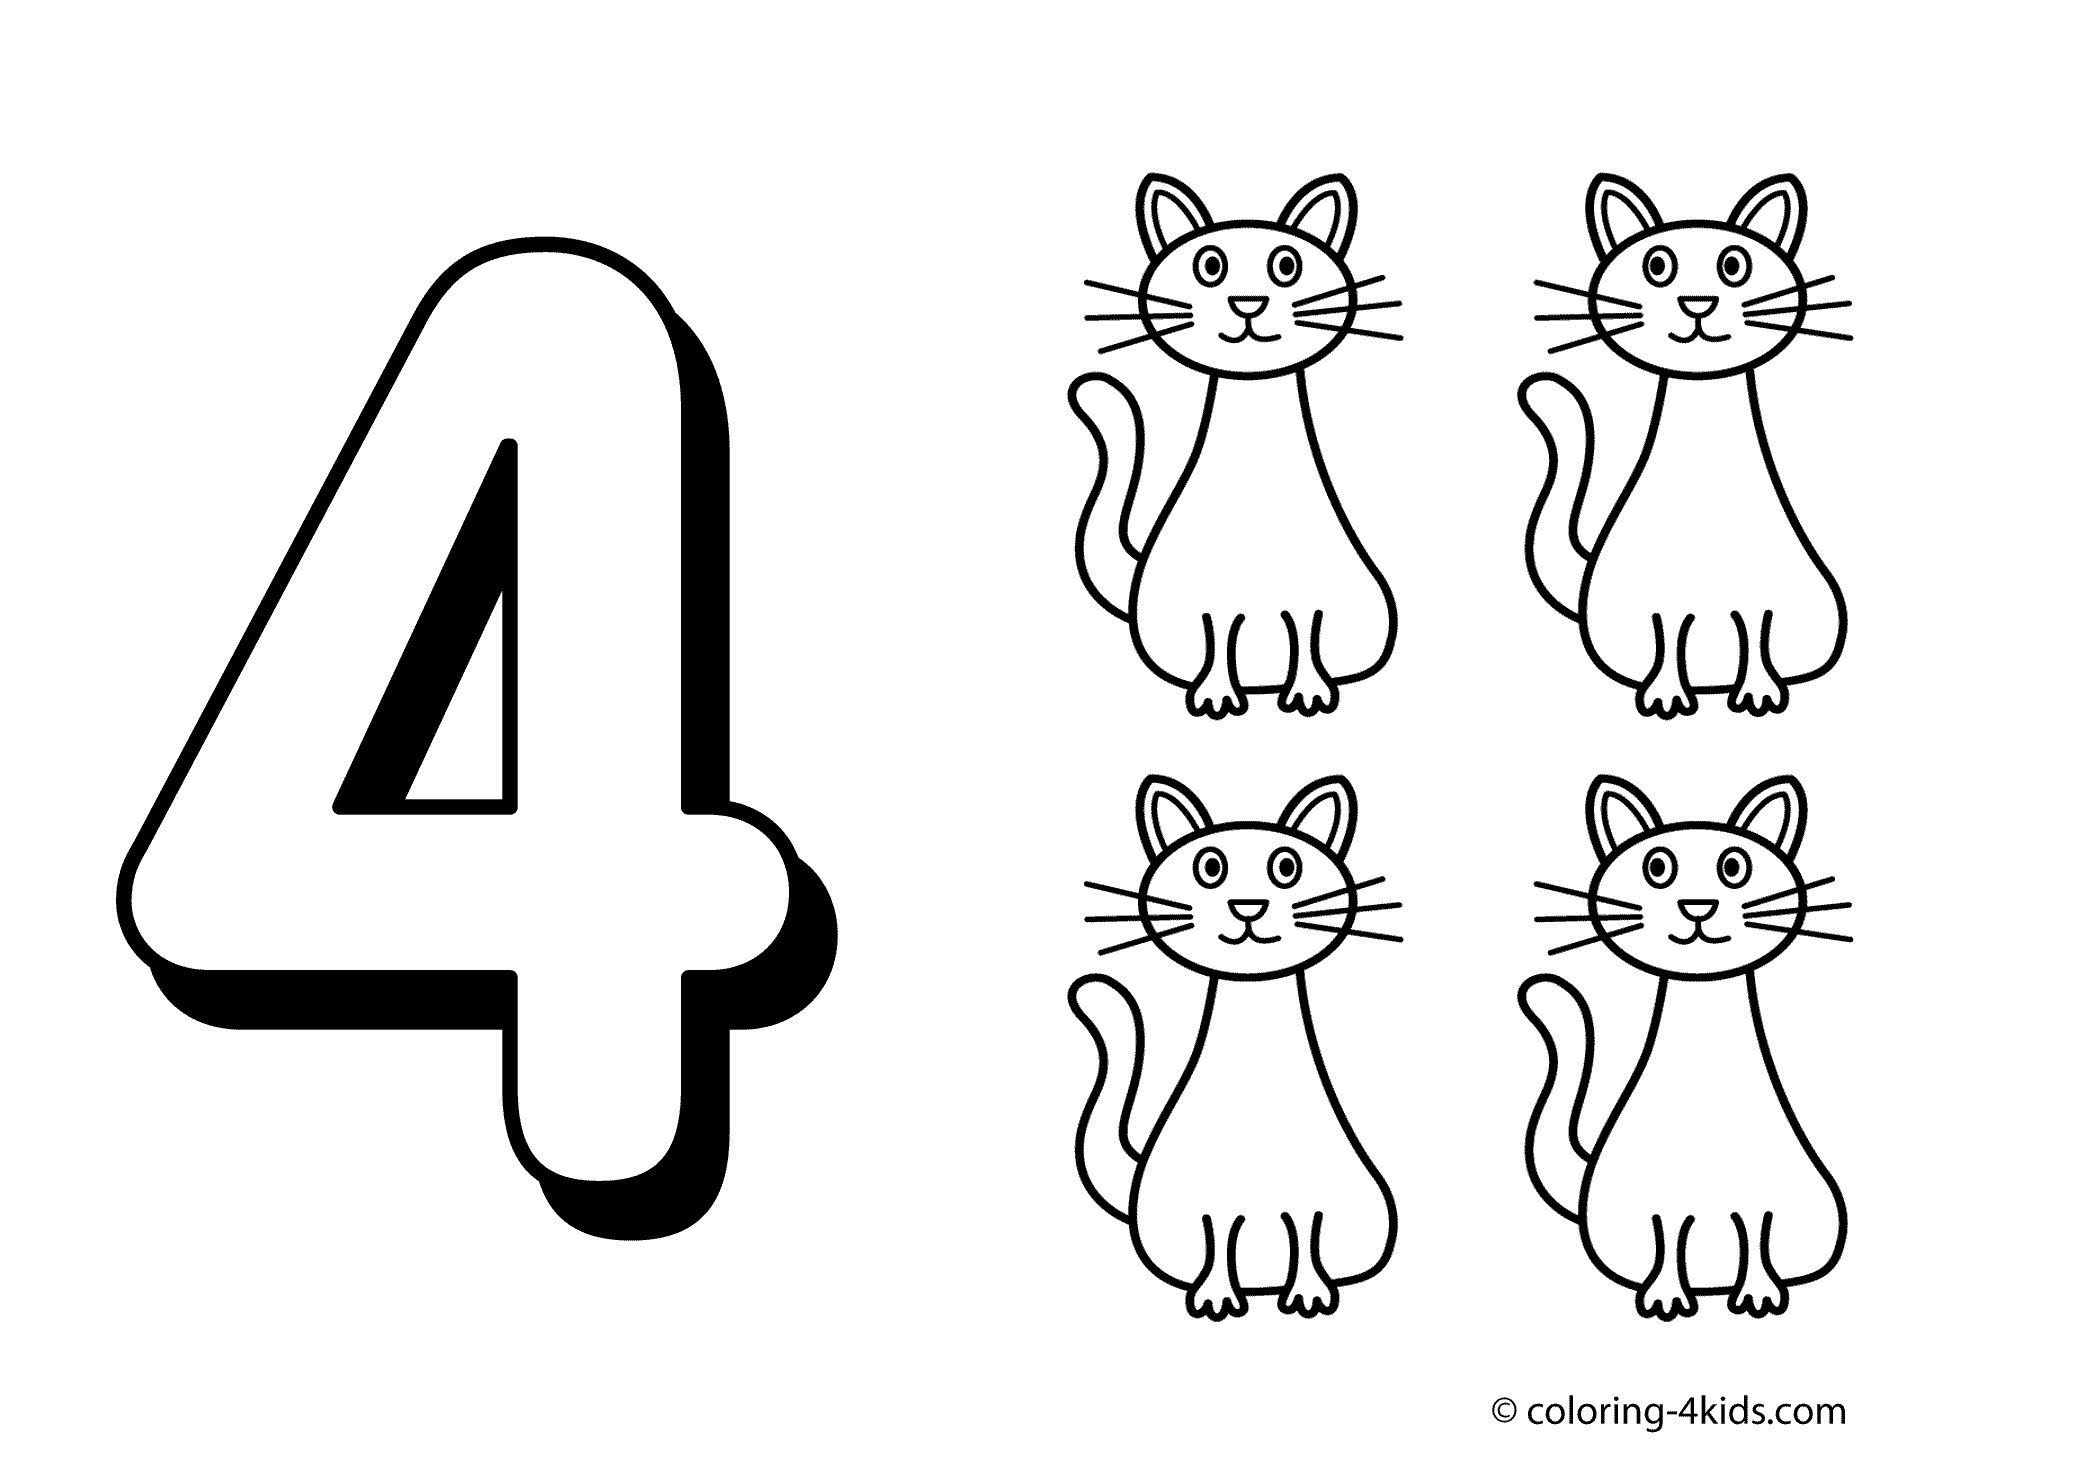 Number 4 clipart coloring page. Free four download clip